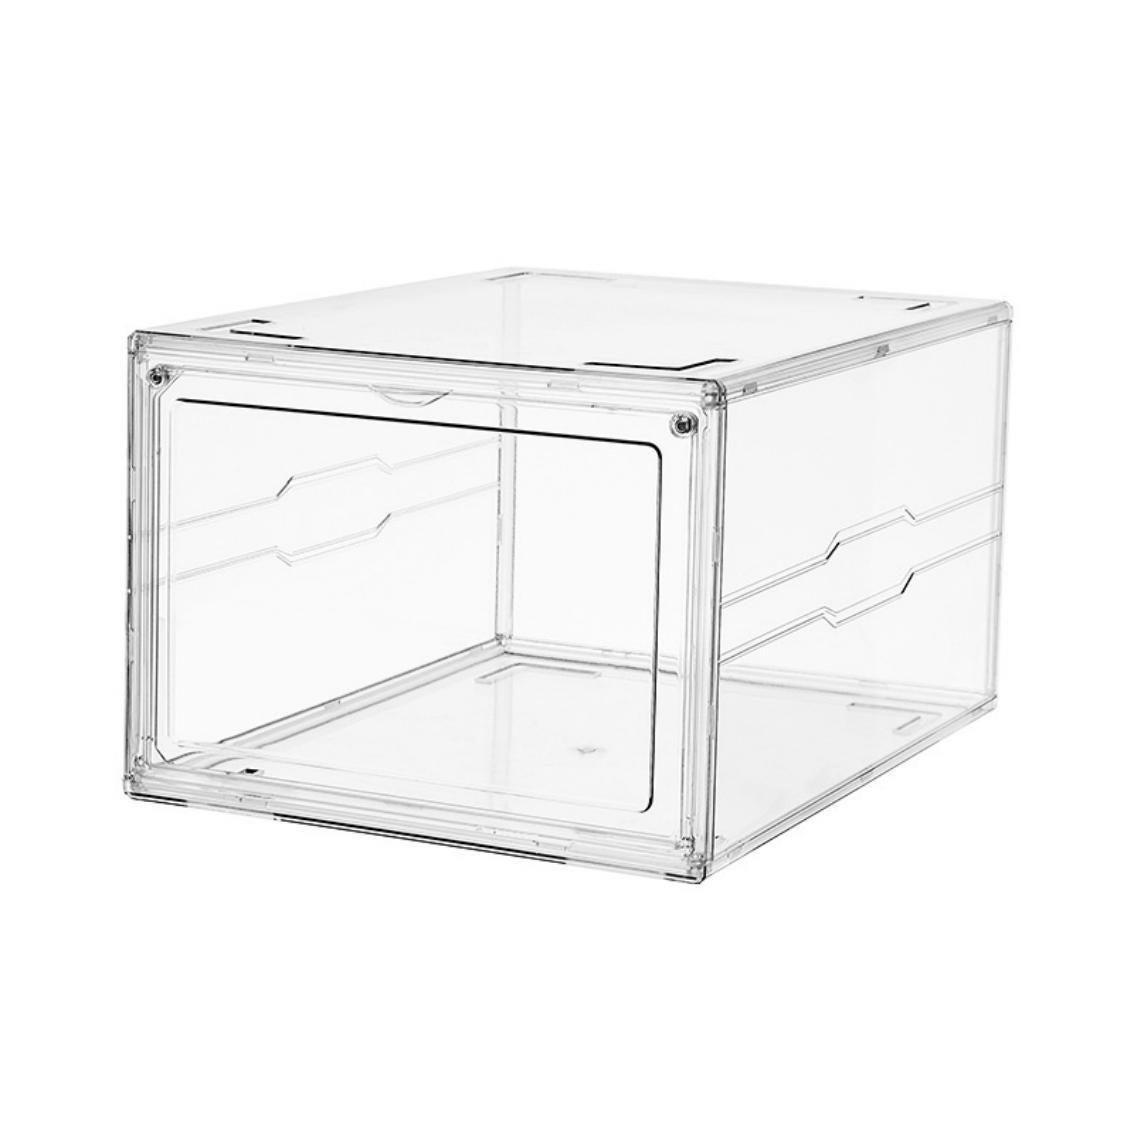 3 X Premium Sneaker Acrylic Display Shoe Box Storage Case Clear Side Open Stackable